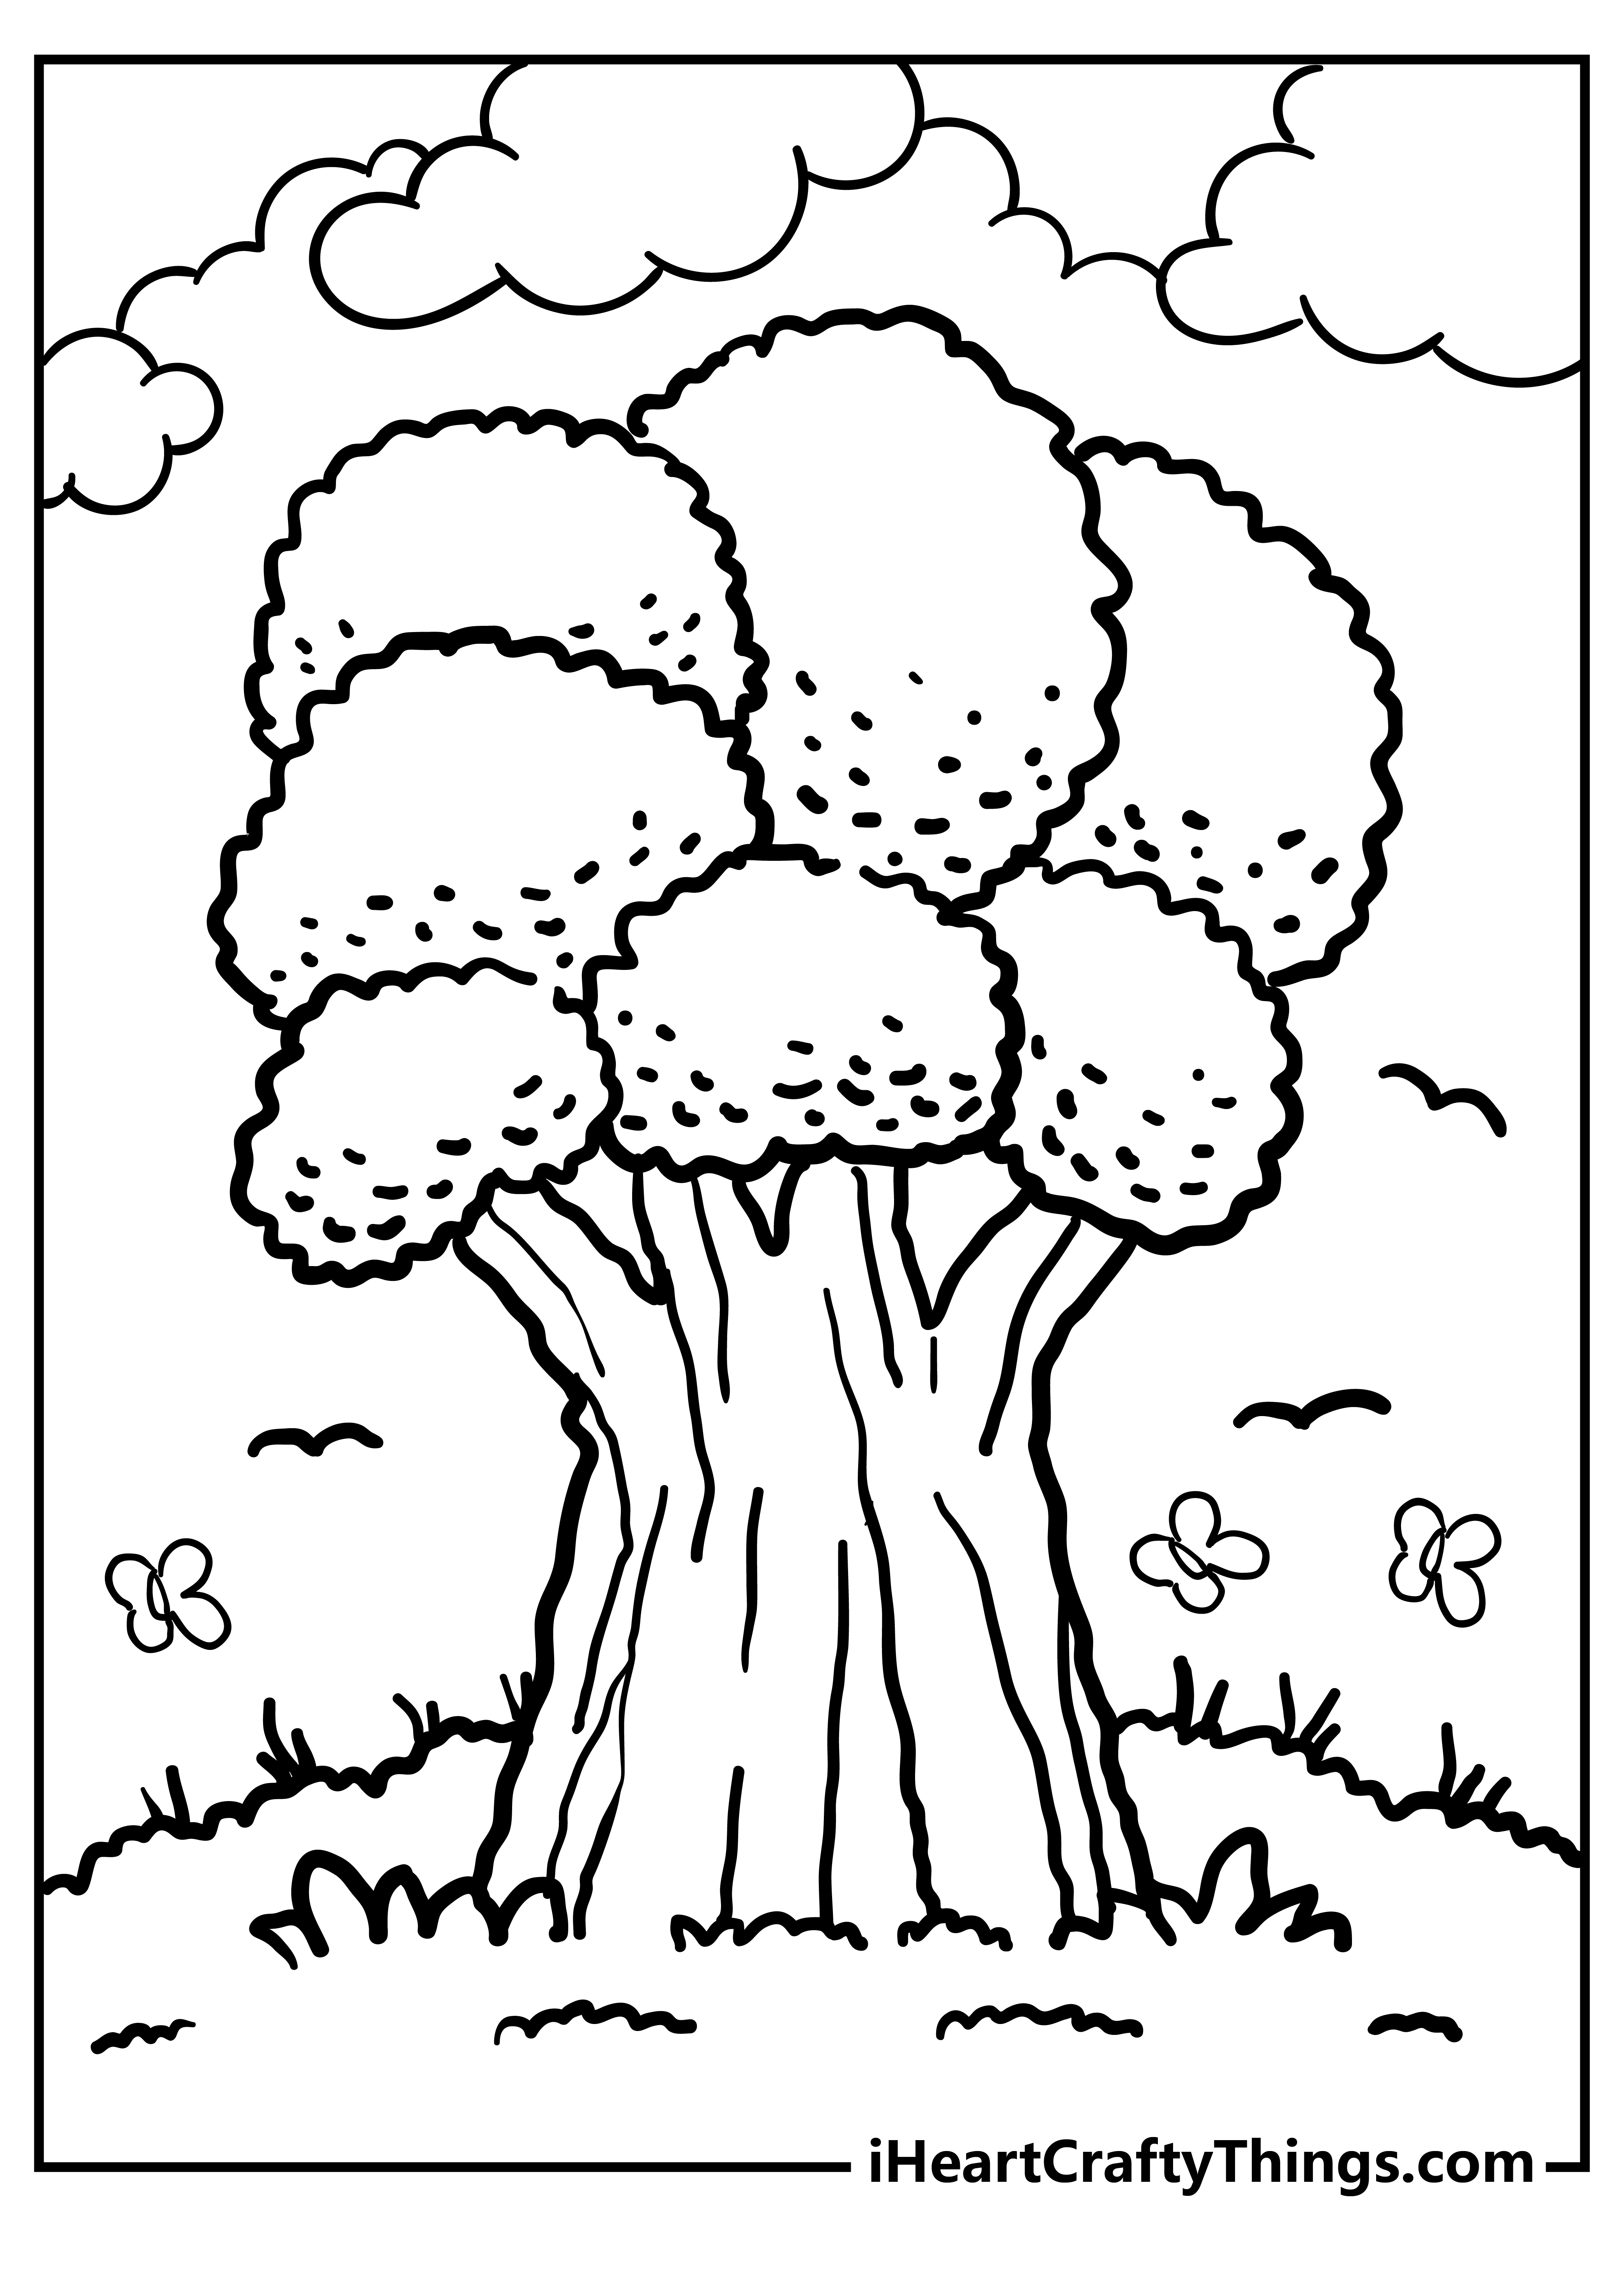 Nature Coloring Pages free pdf download